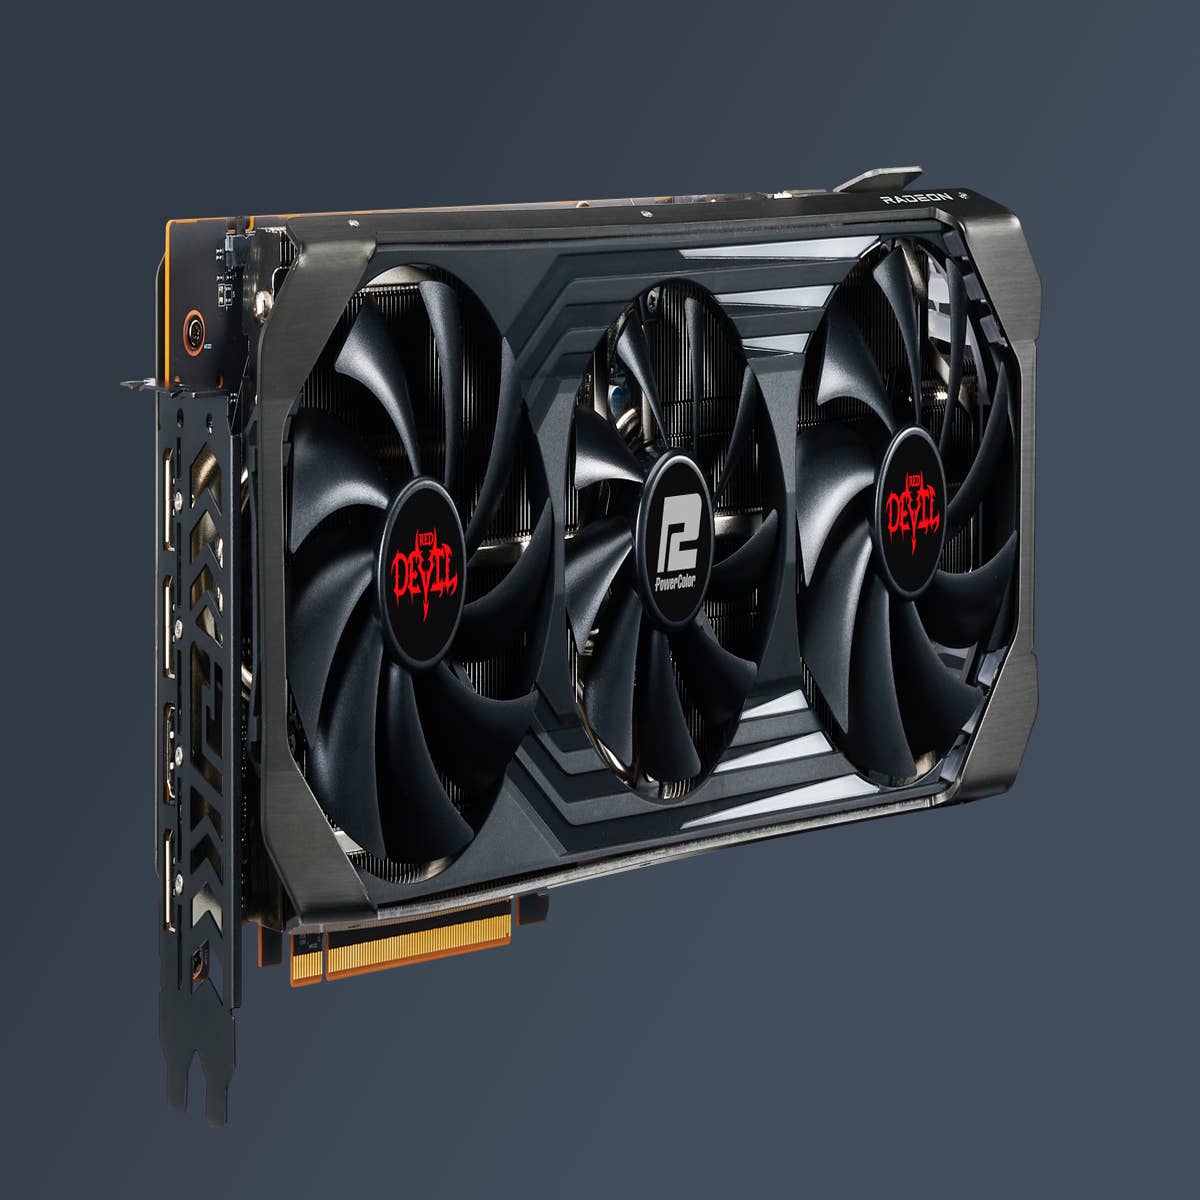 Radeon RX 6950 XT, any good? I want to get a 4070ti but they are